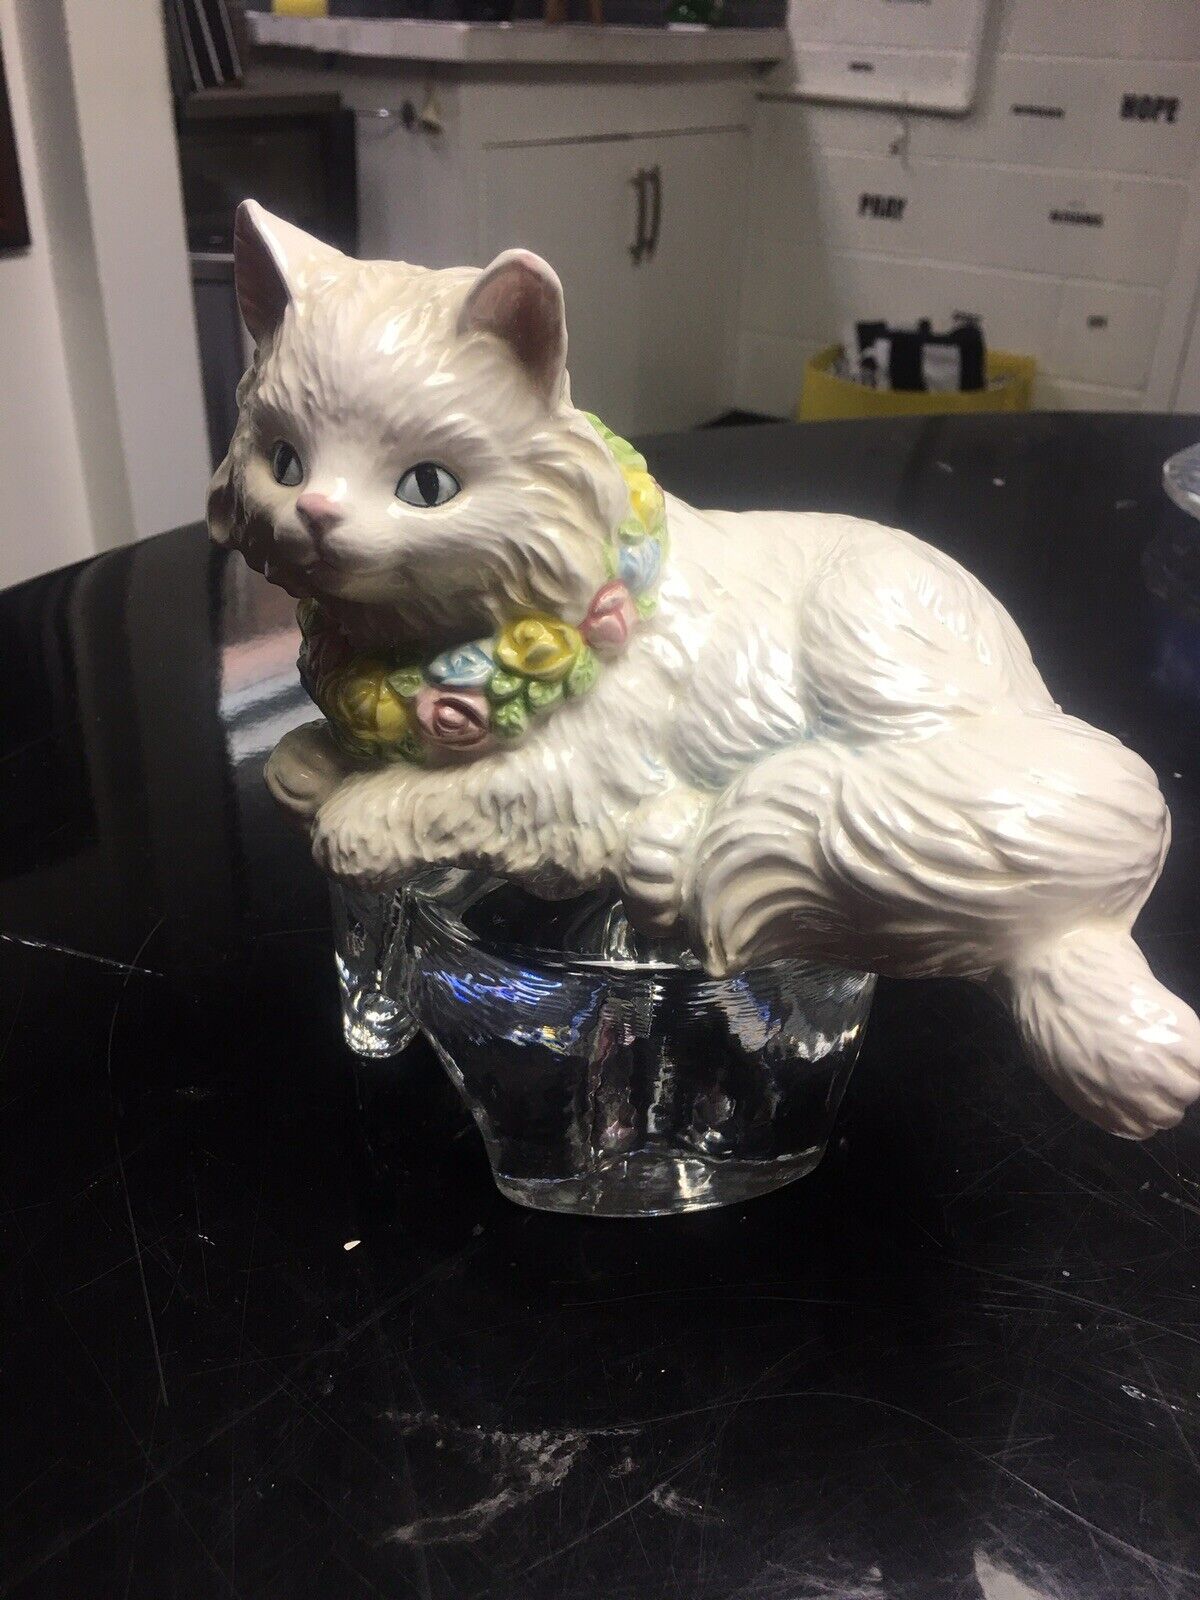 SCHMID VINTAGE CAT MUSIC BOX. BEEN STORED FOR YEARS. CUTE